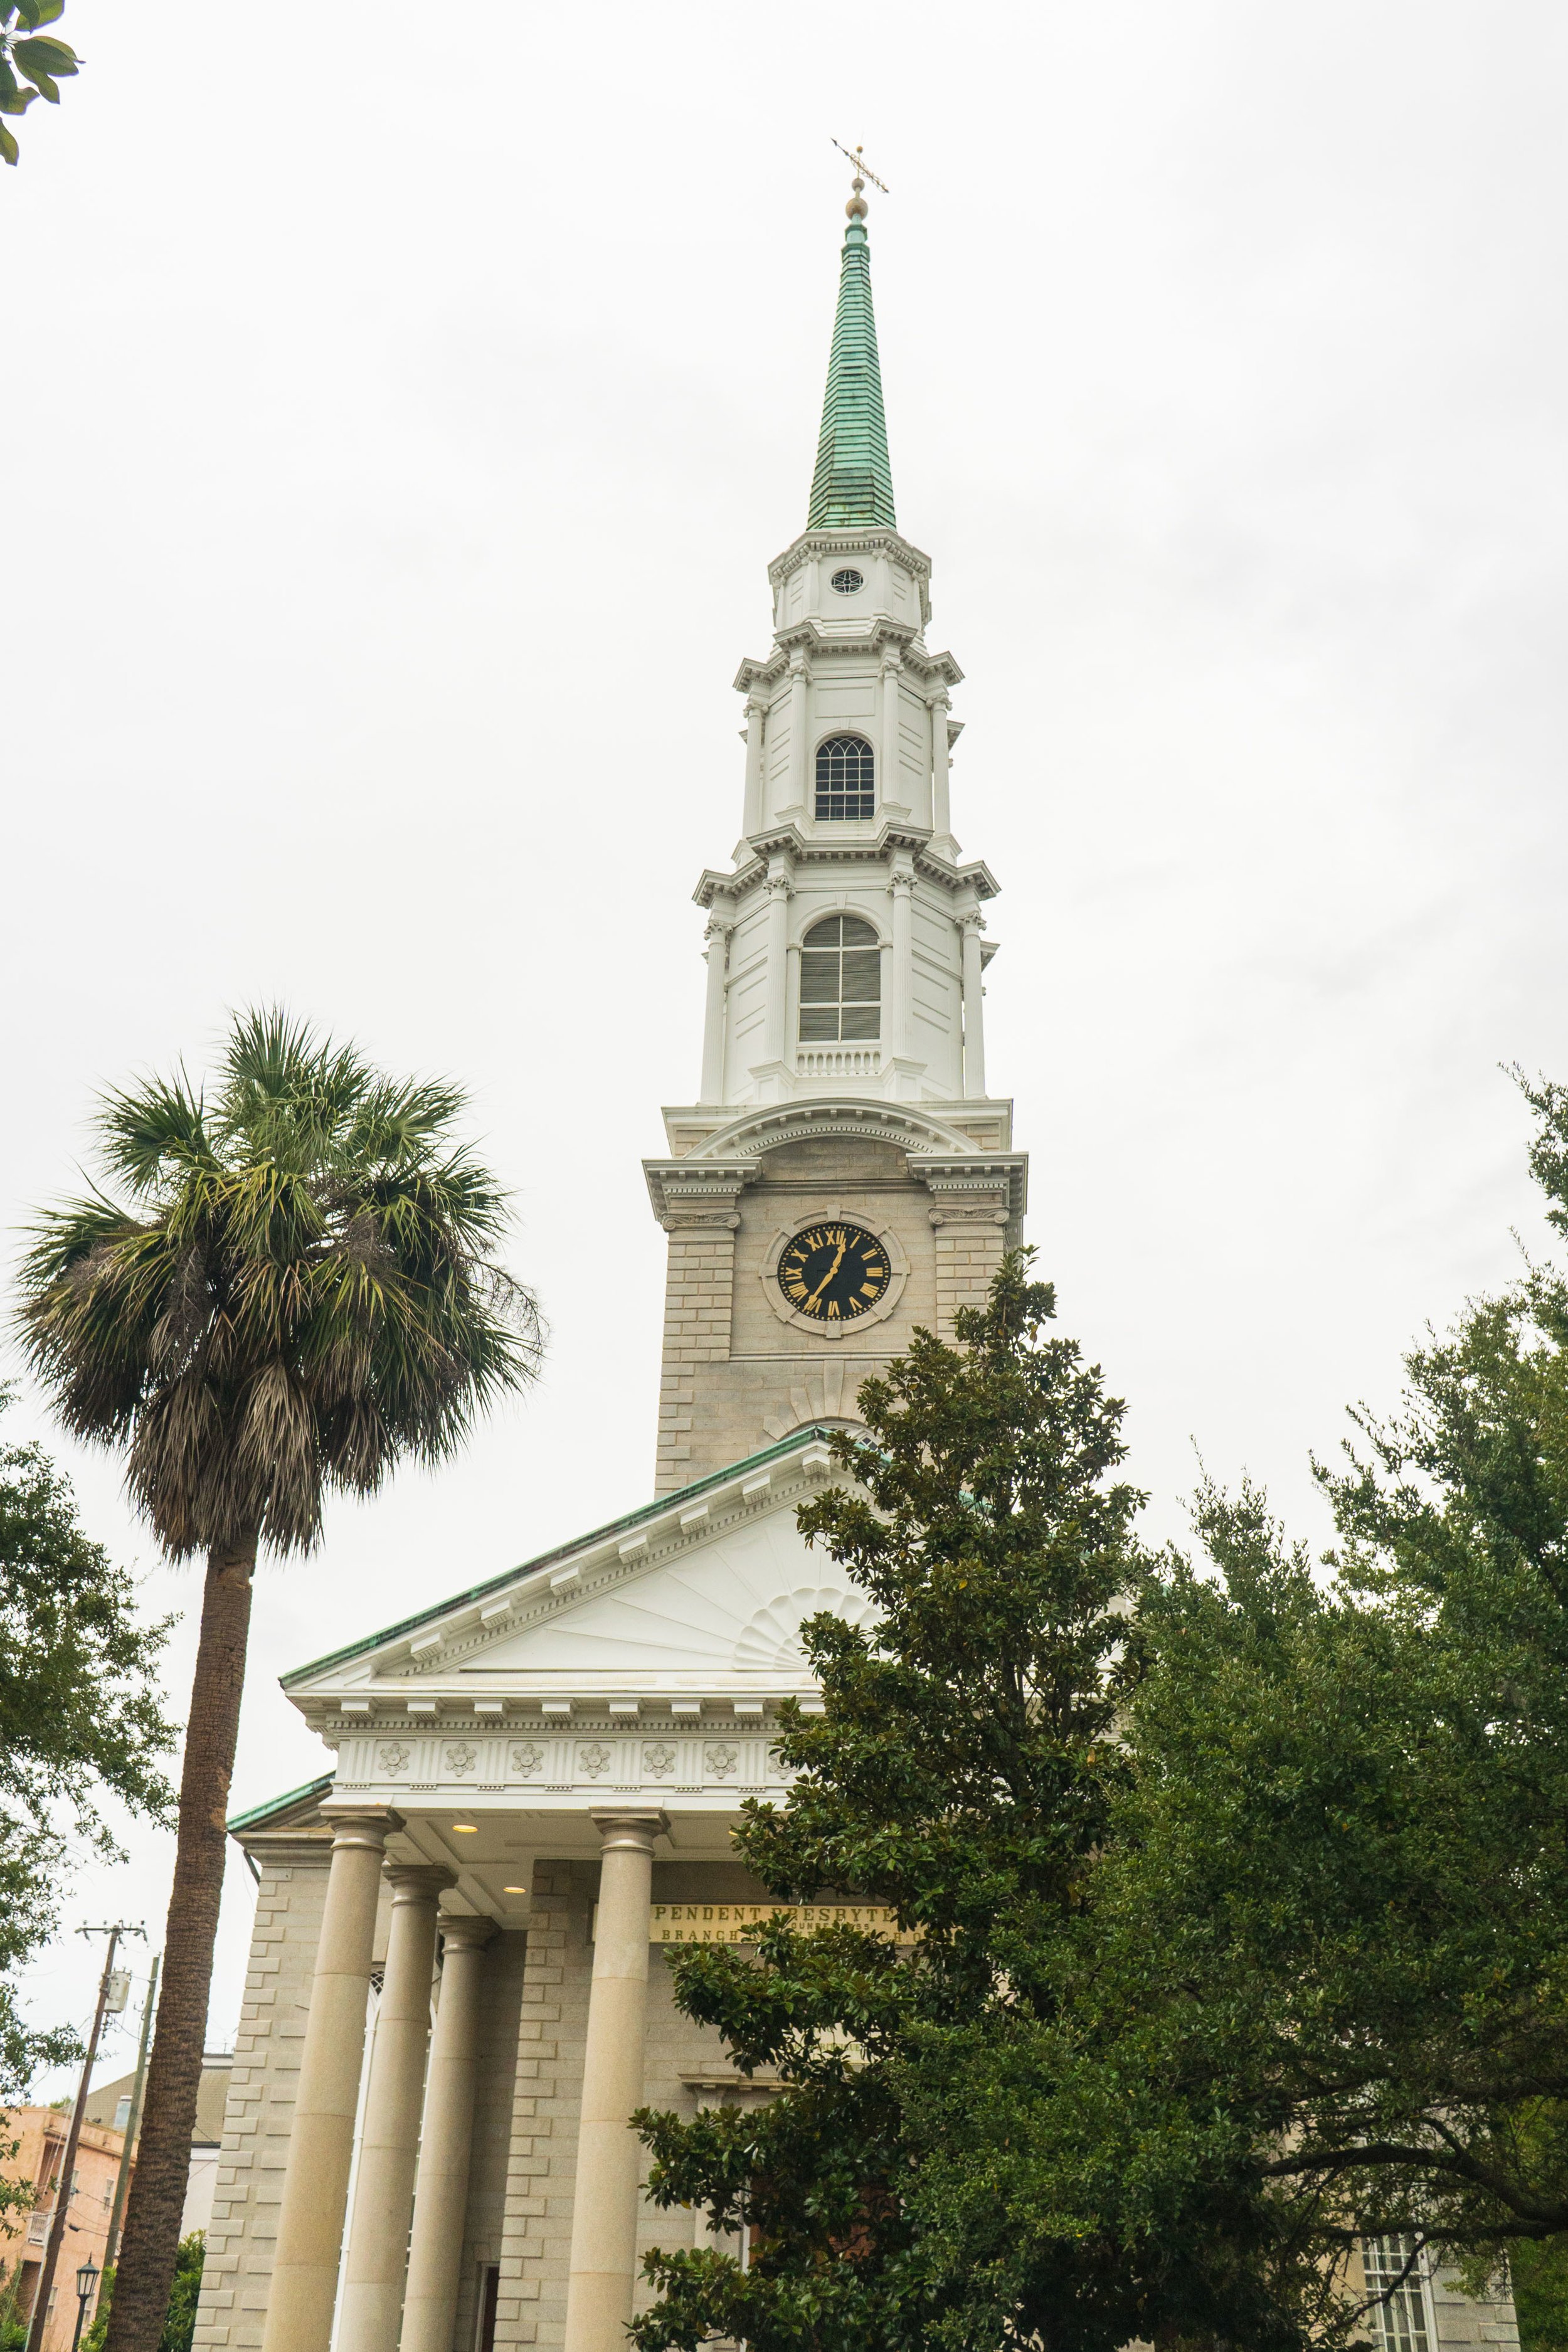  Another one of Savannah’s many pretty churches 